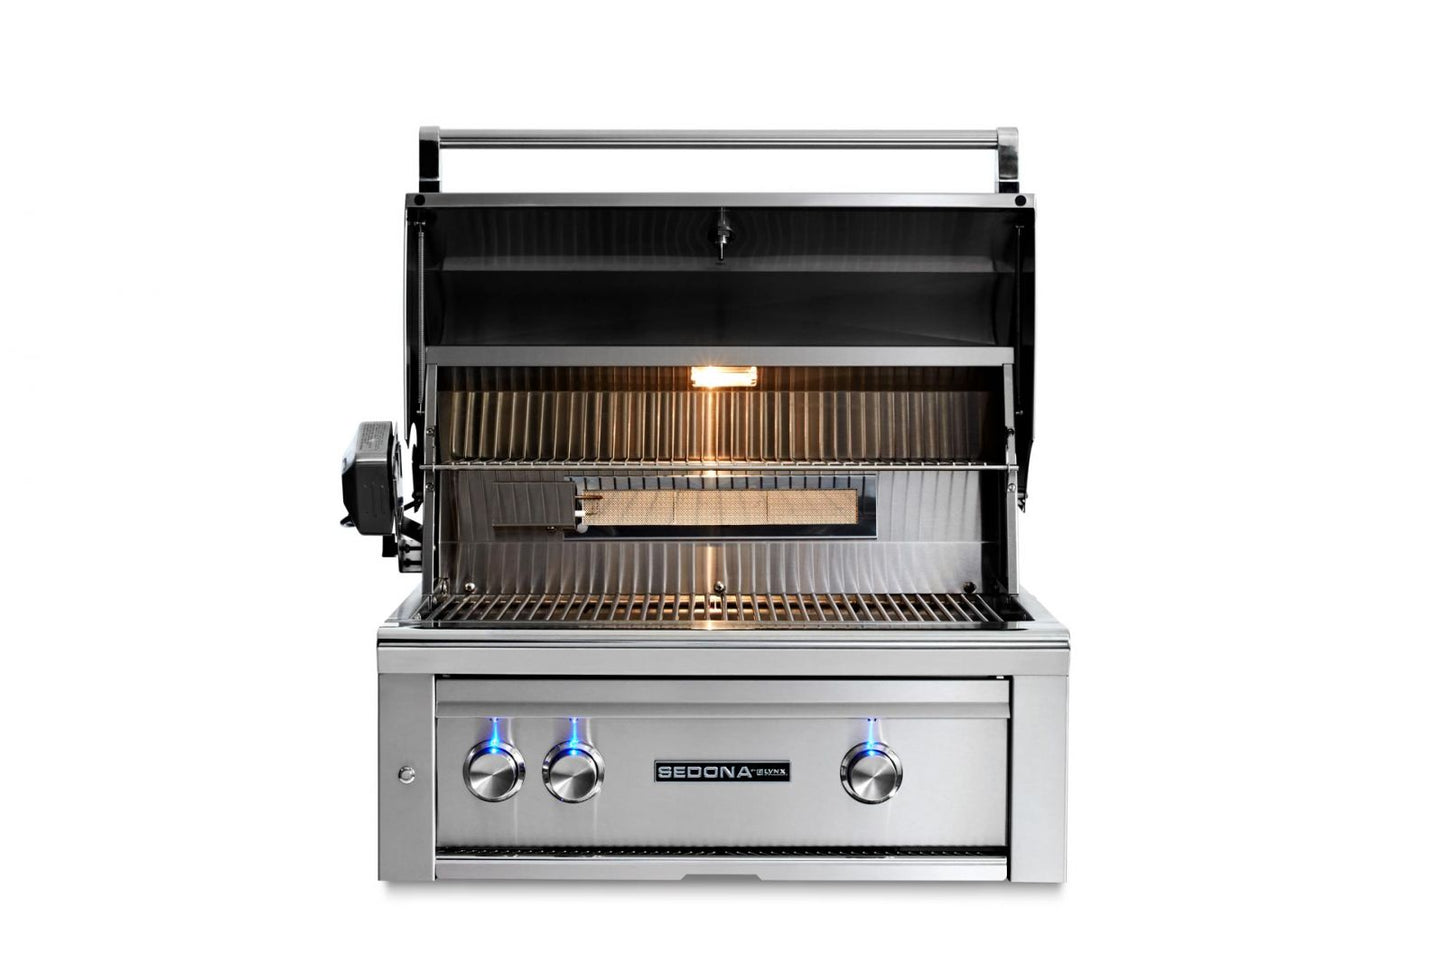 Lynx Sedona 30 Inch Propane Gas Grill with Rotisserie - SS Tube Burners